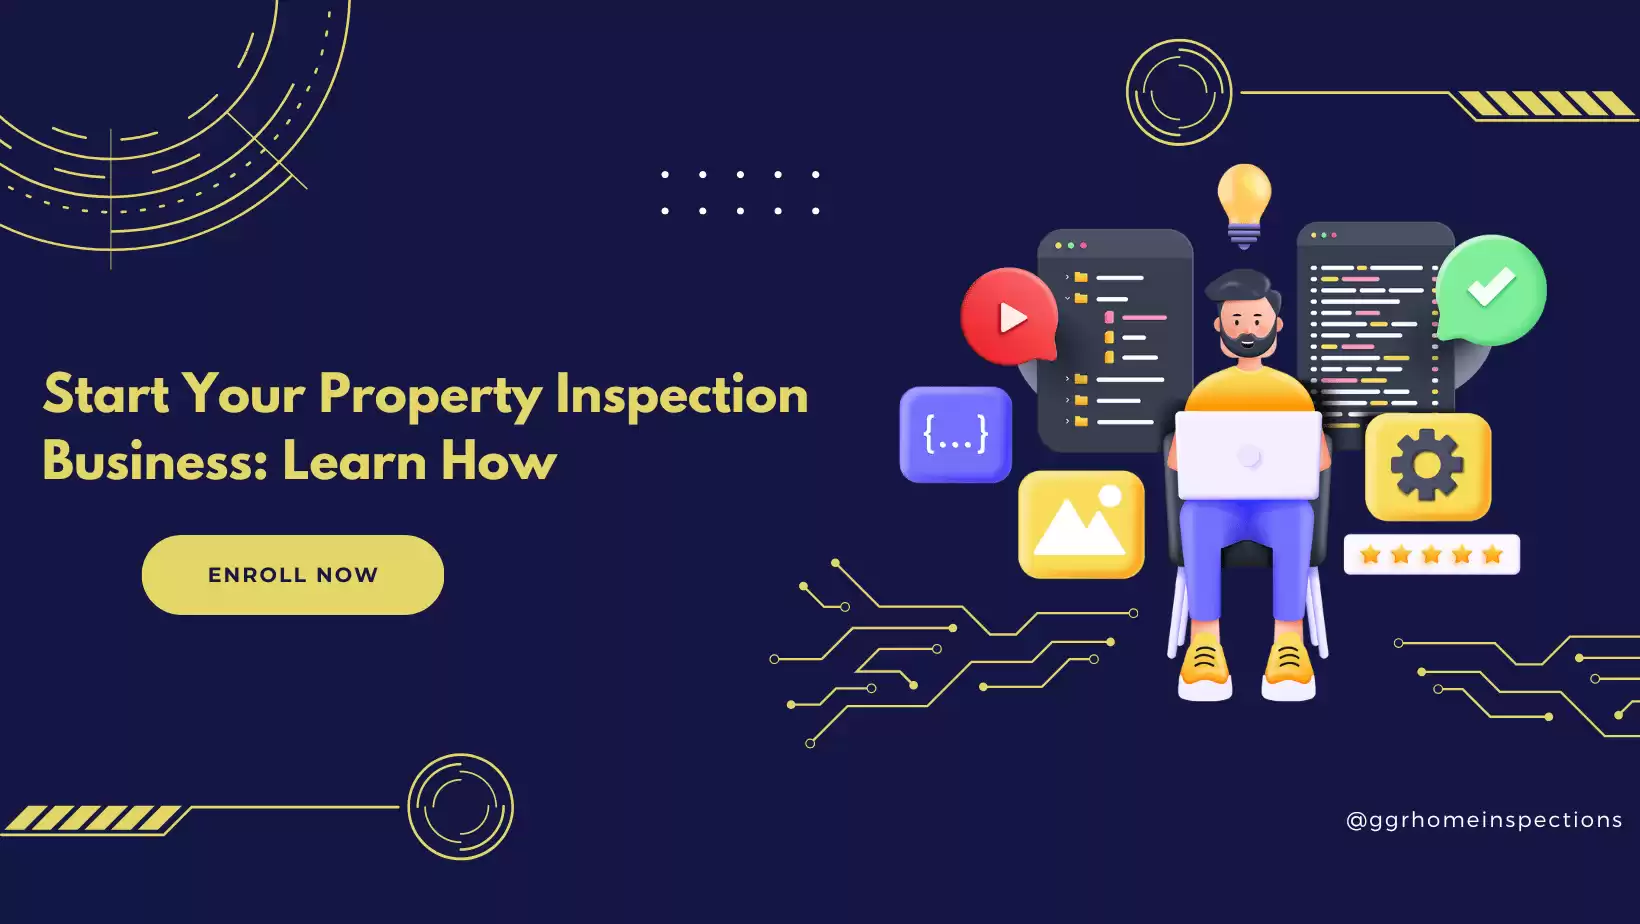 Start Your Property Inspection Business: How To Get Started